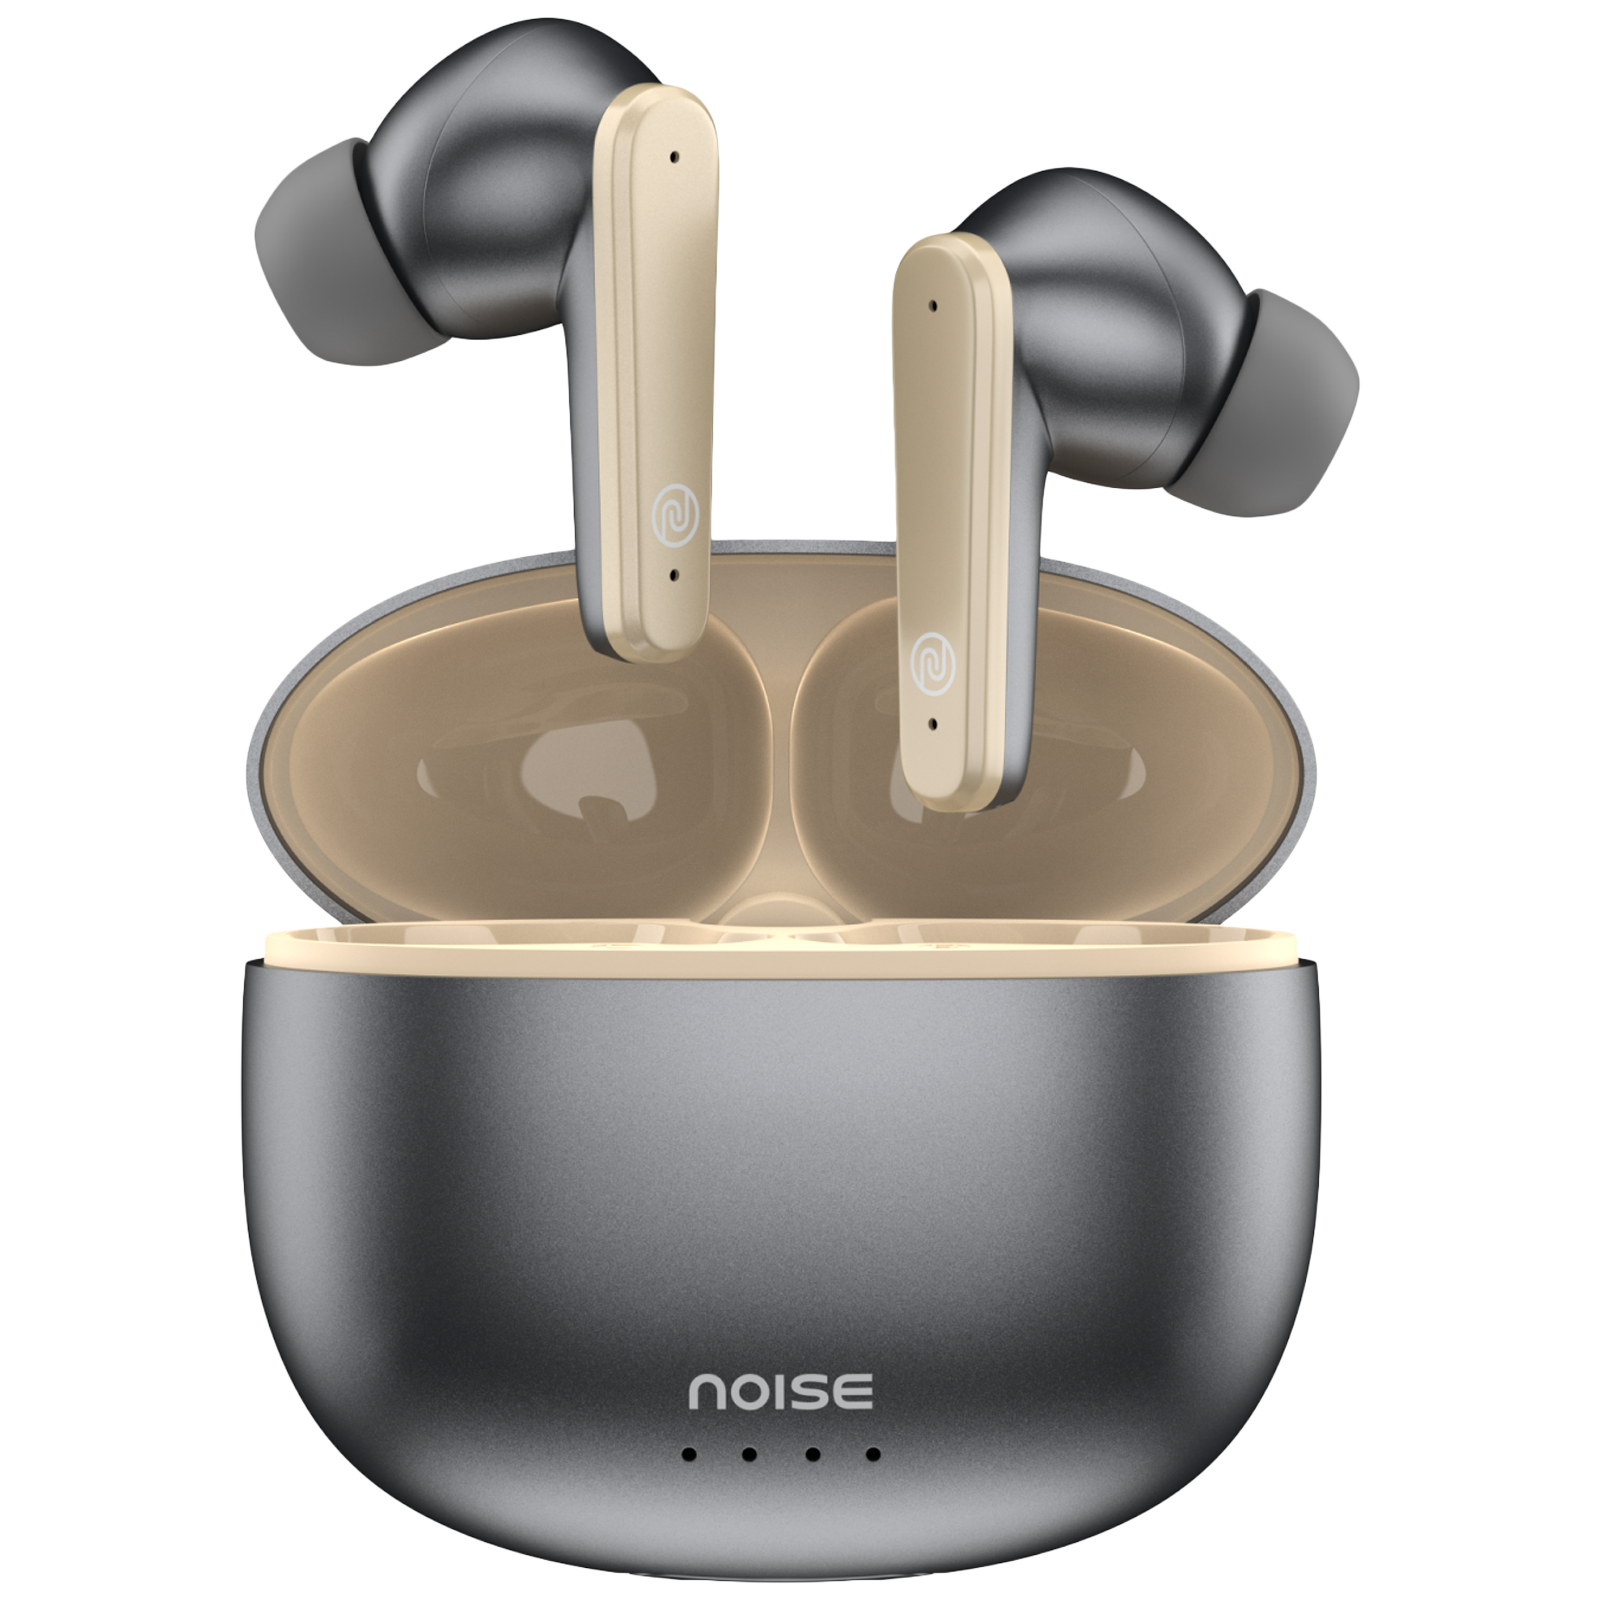 noise Buds VS104 Max TWS Earbuds with Active Noise Cancellation (IPX5 Water Resistant, Instacharge, Silver Grey)